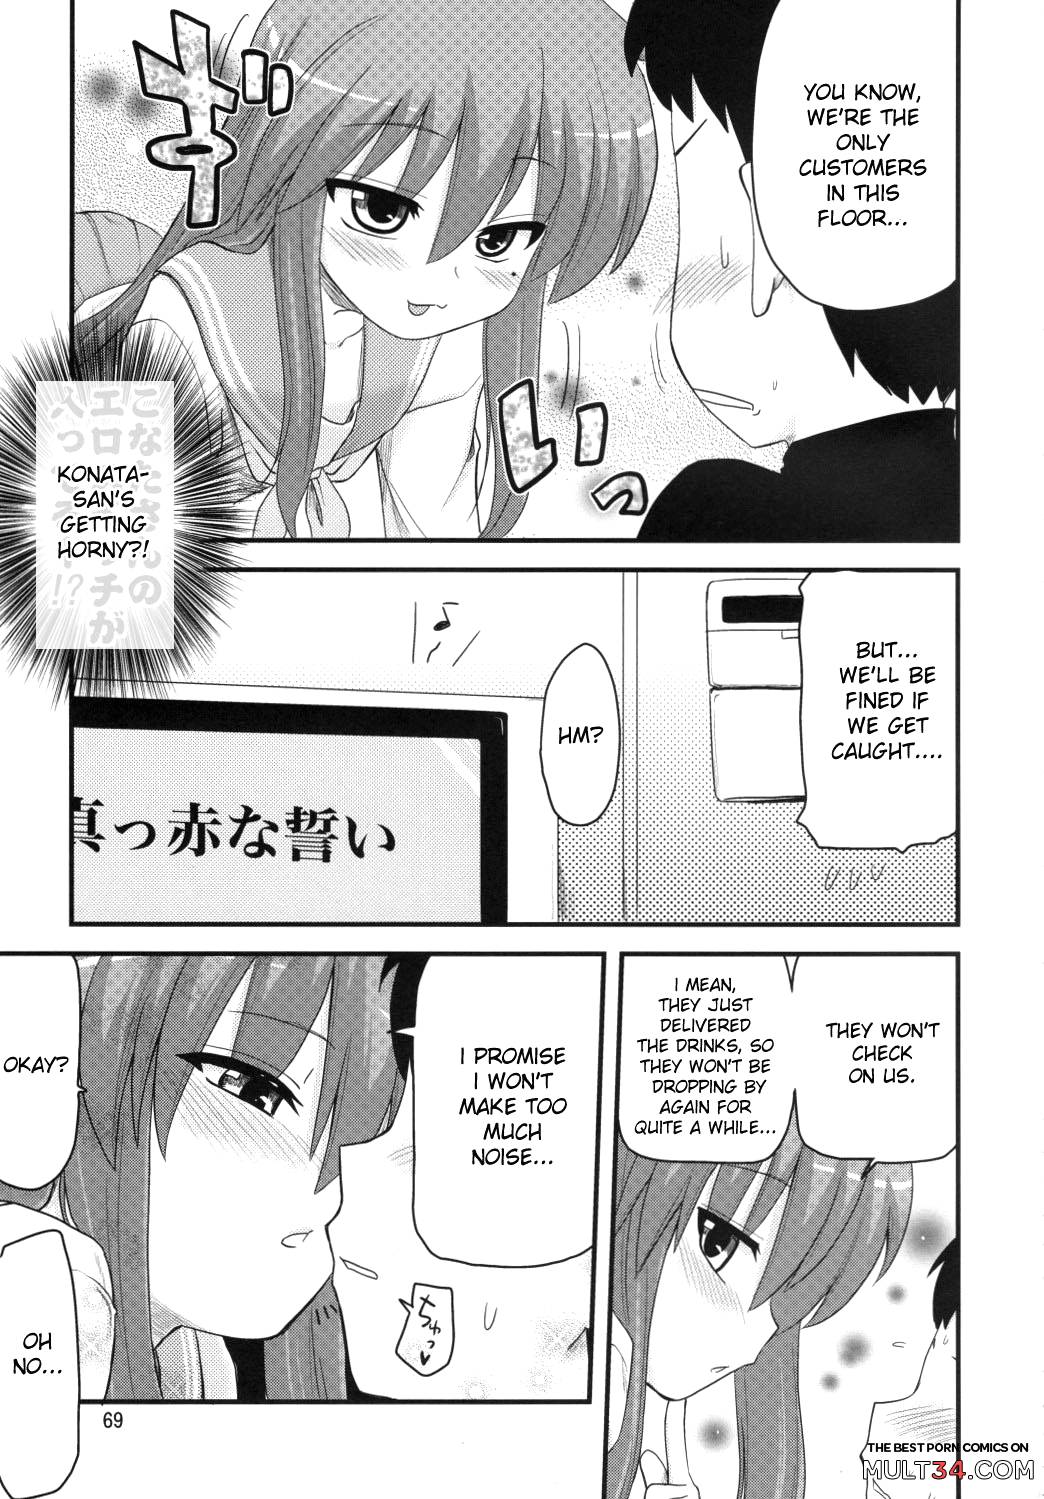 Konata and Oh-zu 4 people each and every one + 1 page 65